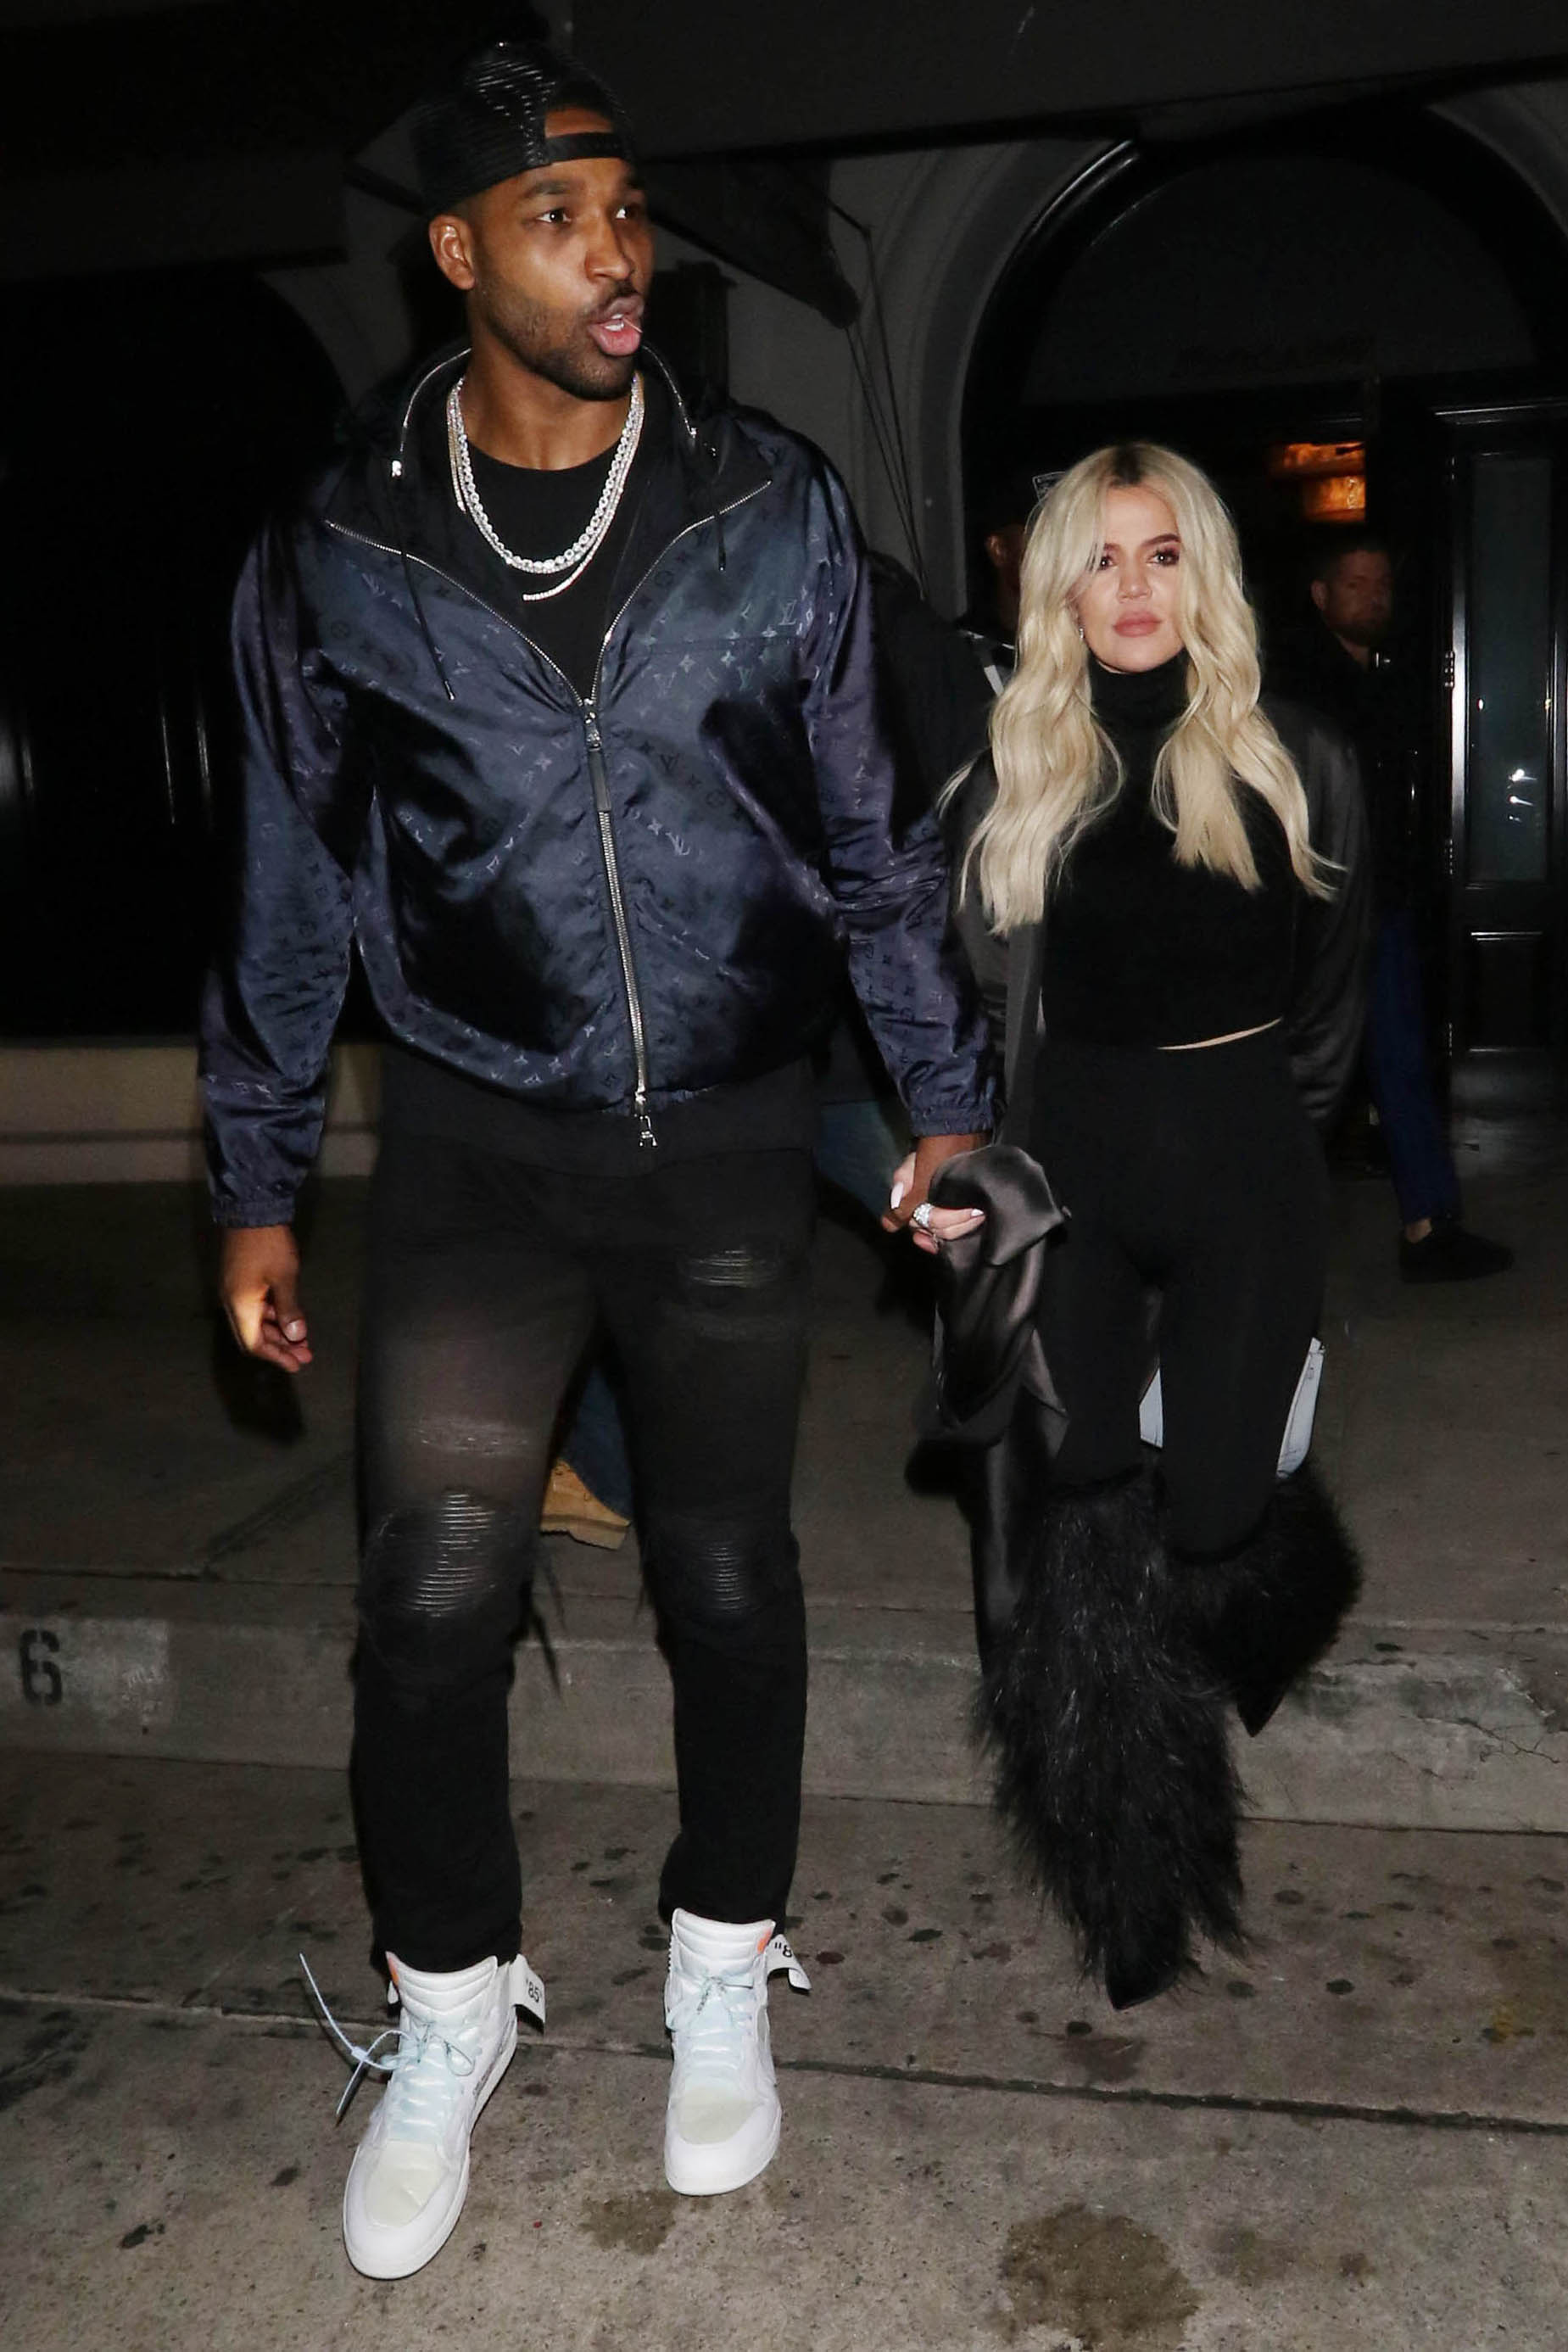 Amid many cheating allegations made against Tristan, Khloe ended things with the star basketball player